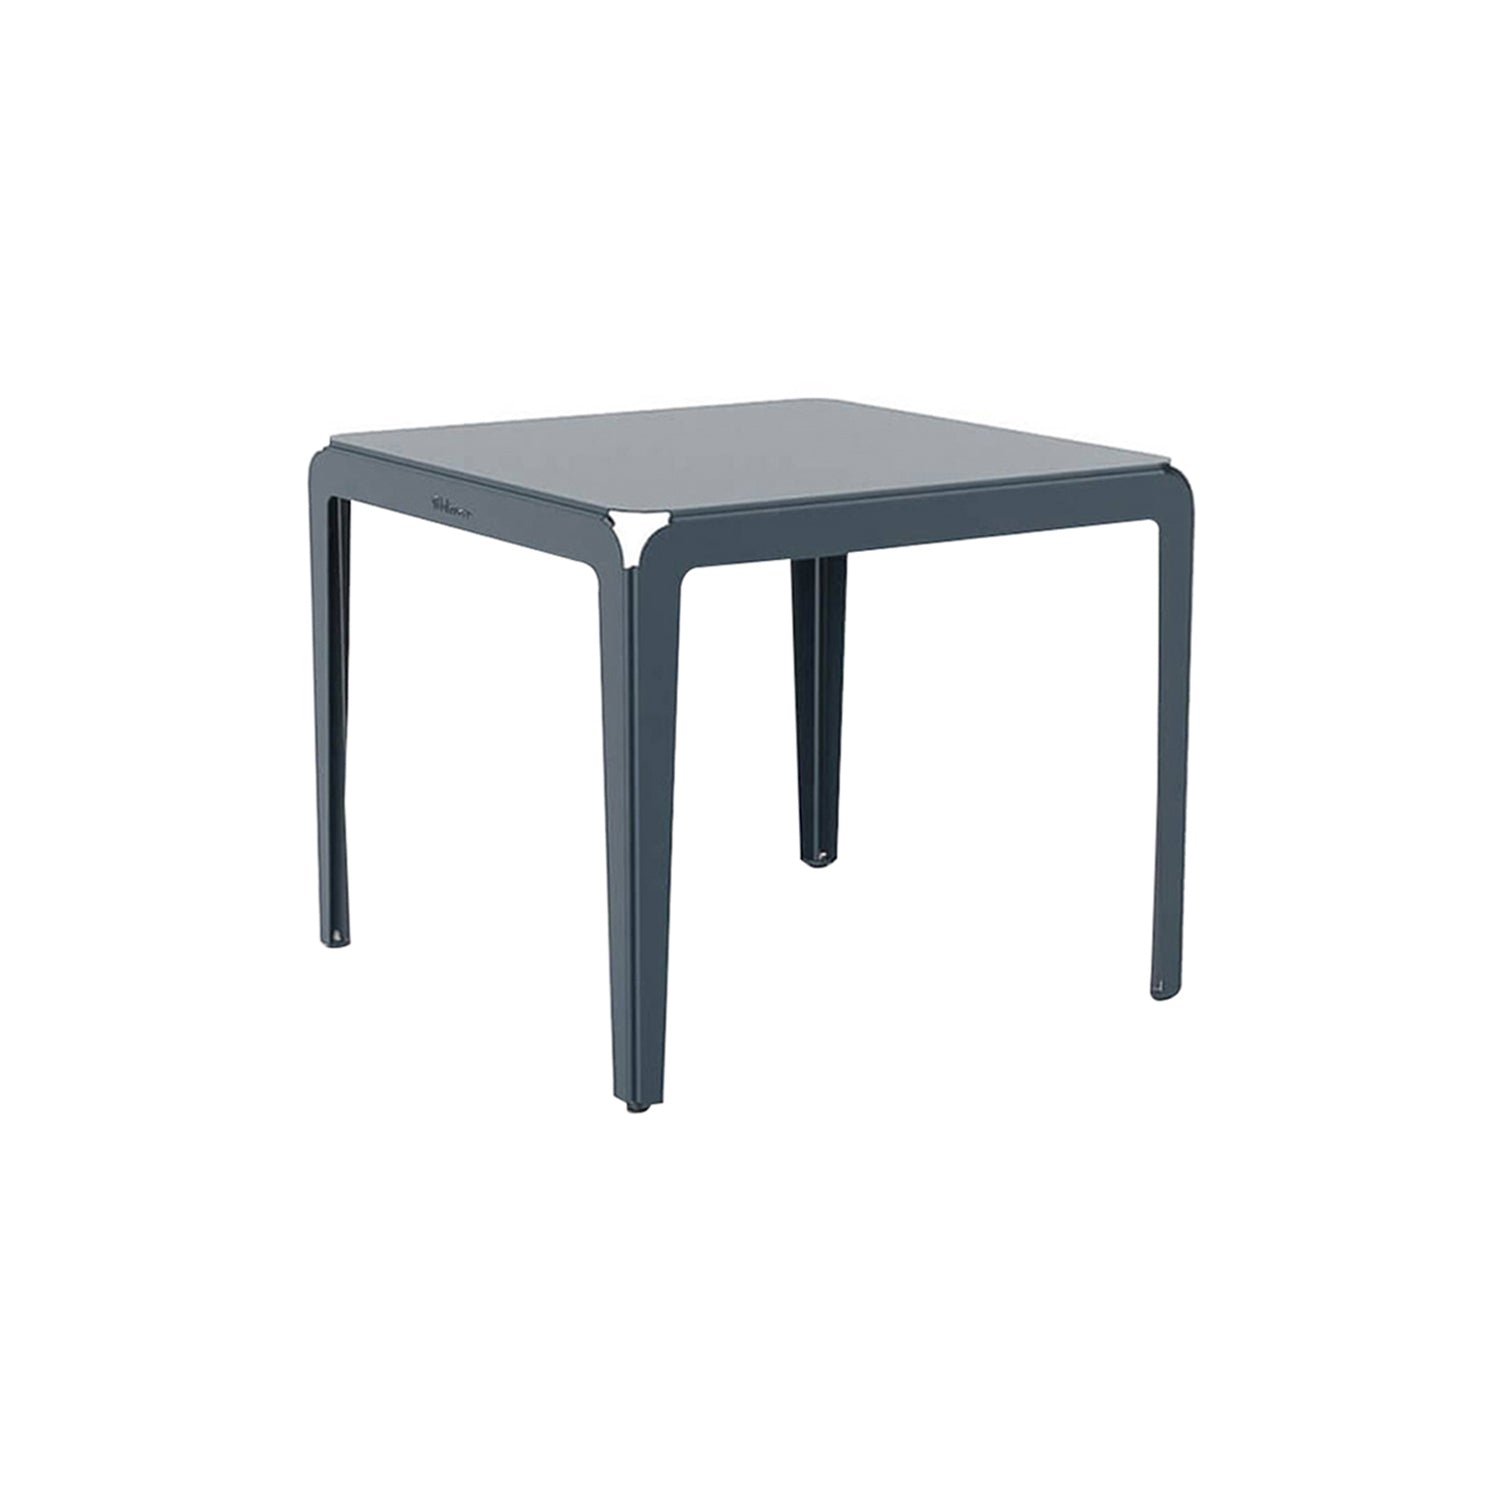 Bended Table: Outdoor + Small - 35.4